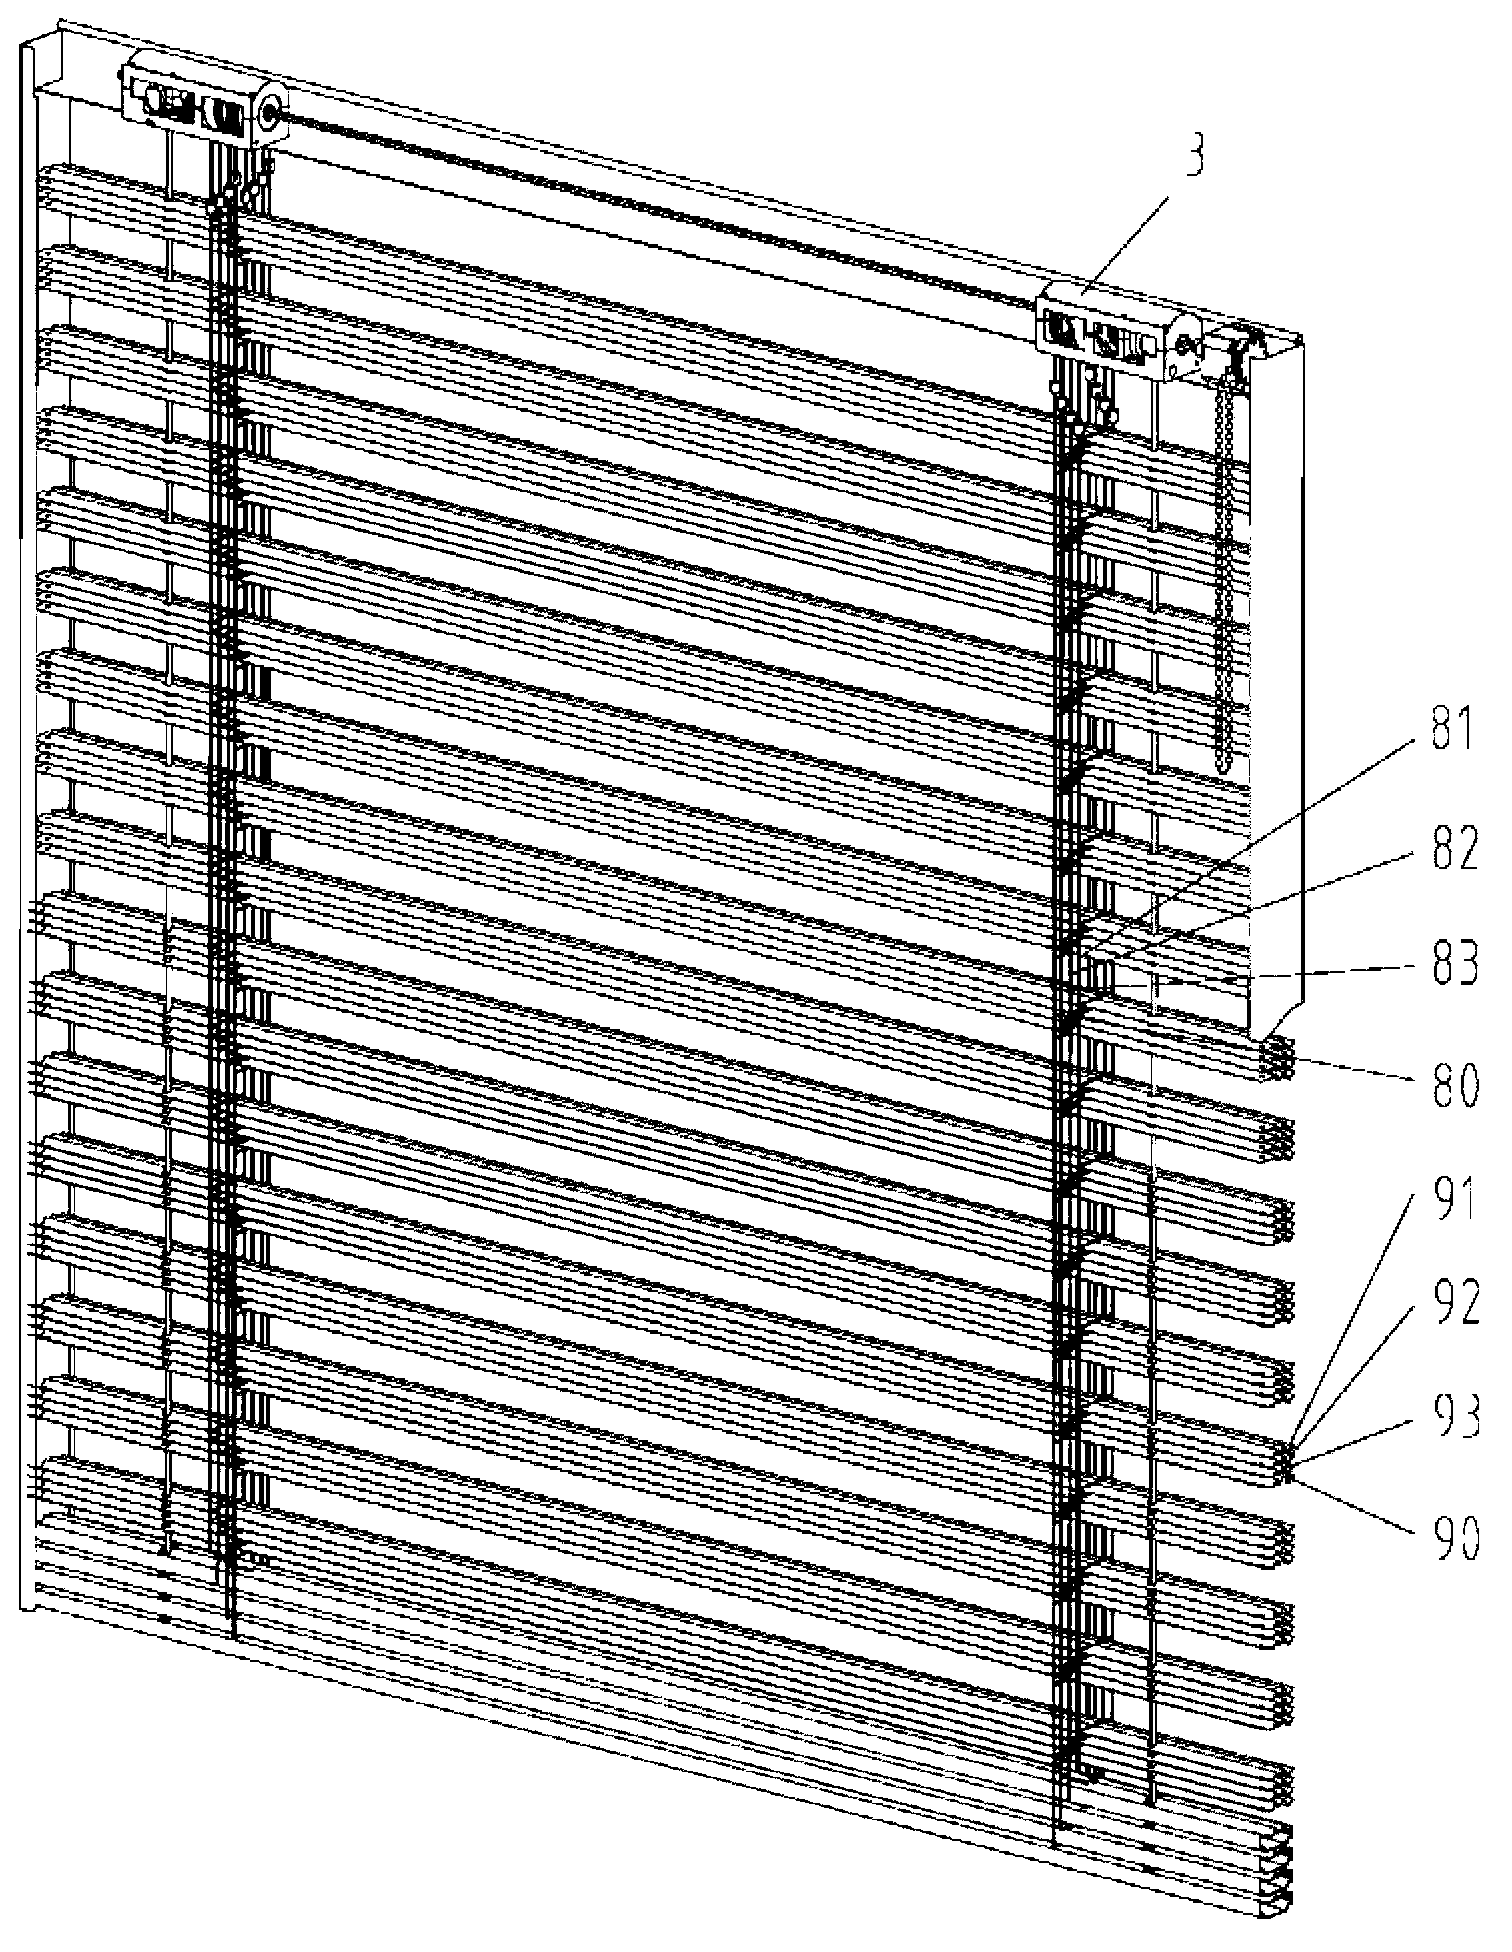 Sliding block mechanism of louver and sliding block system with gear clutch turnover mechanism